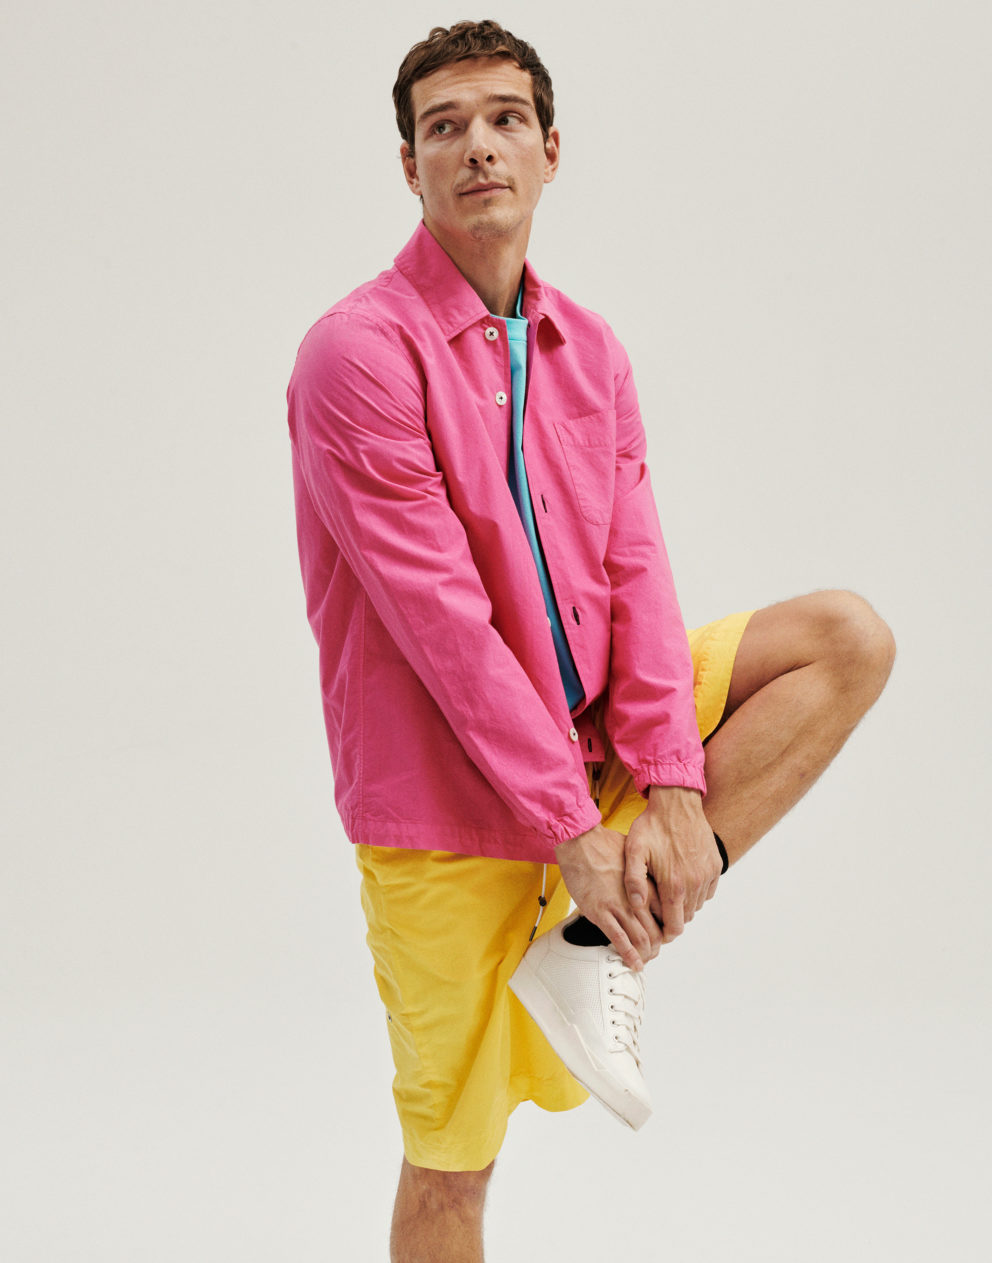 191114 0140 Bloomingdales Mens Ss20 001 By Christian Hogstedt